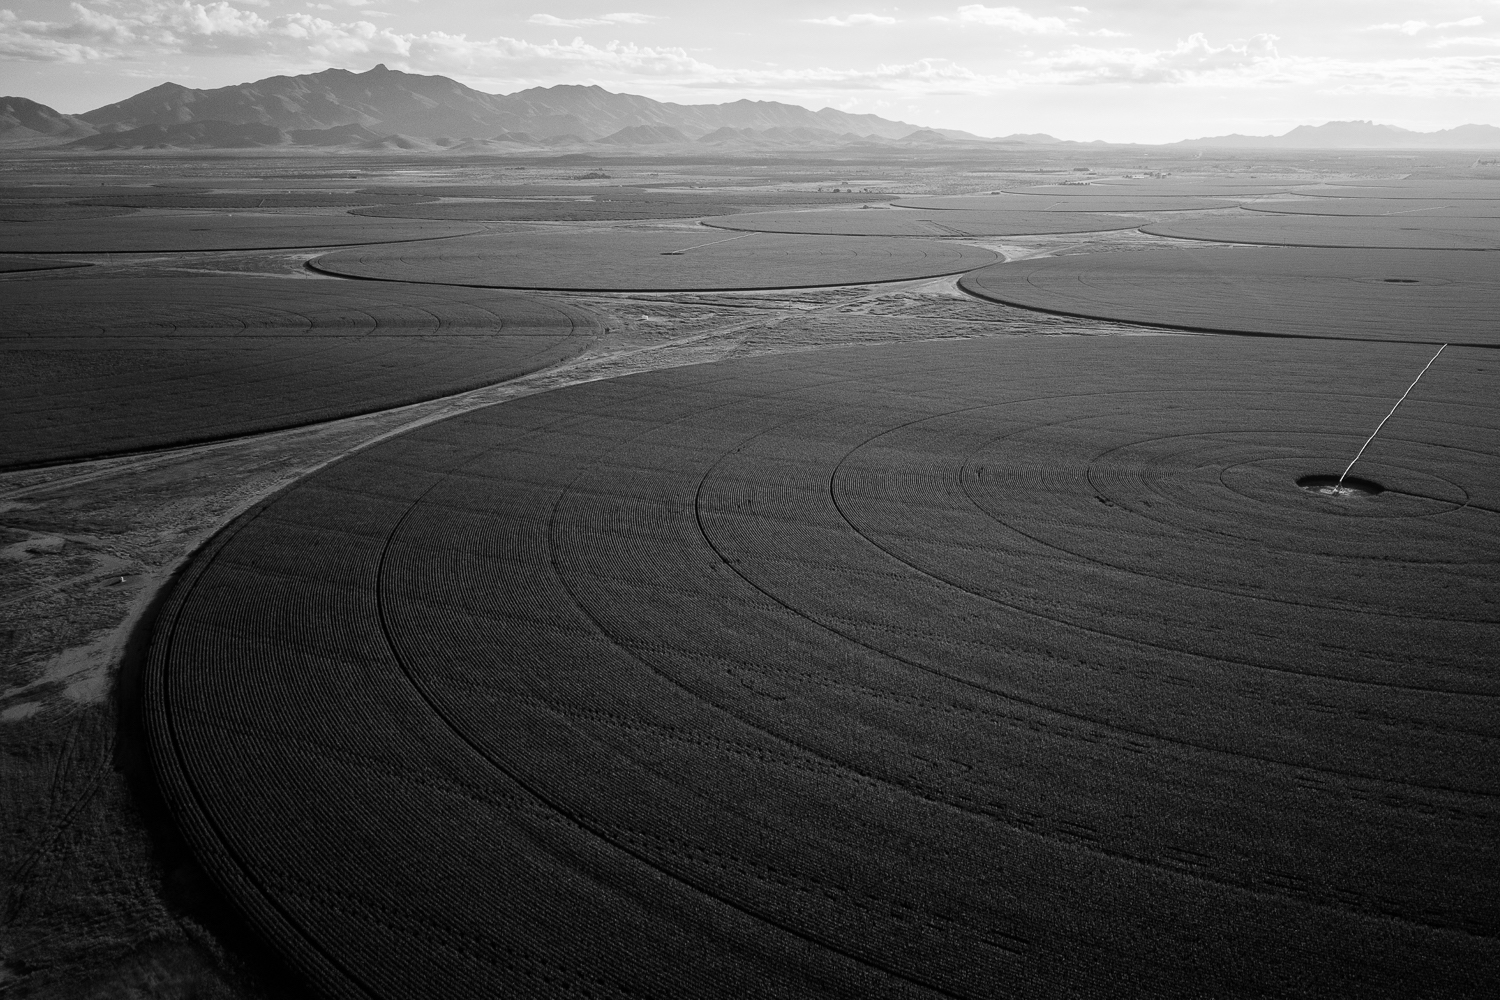 rings of cropland from aerial view